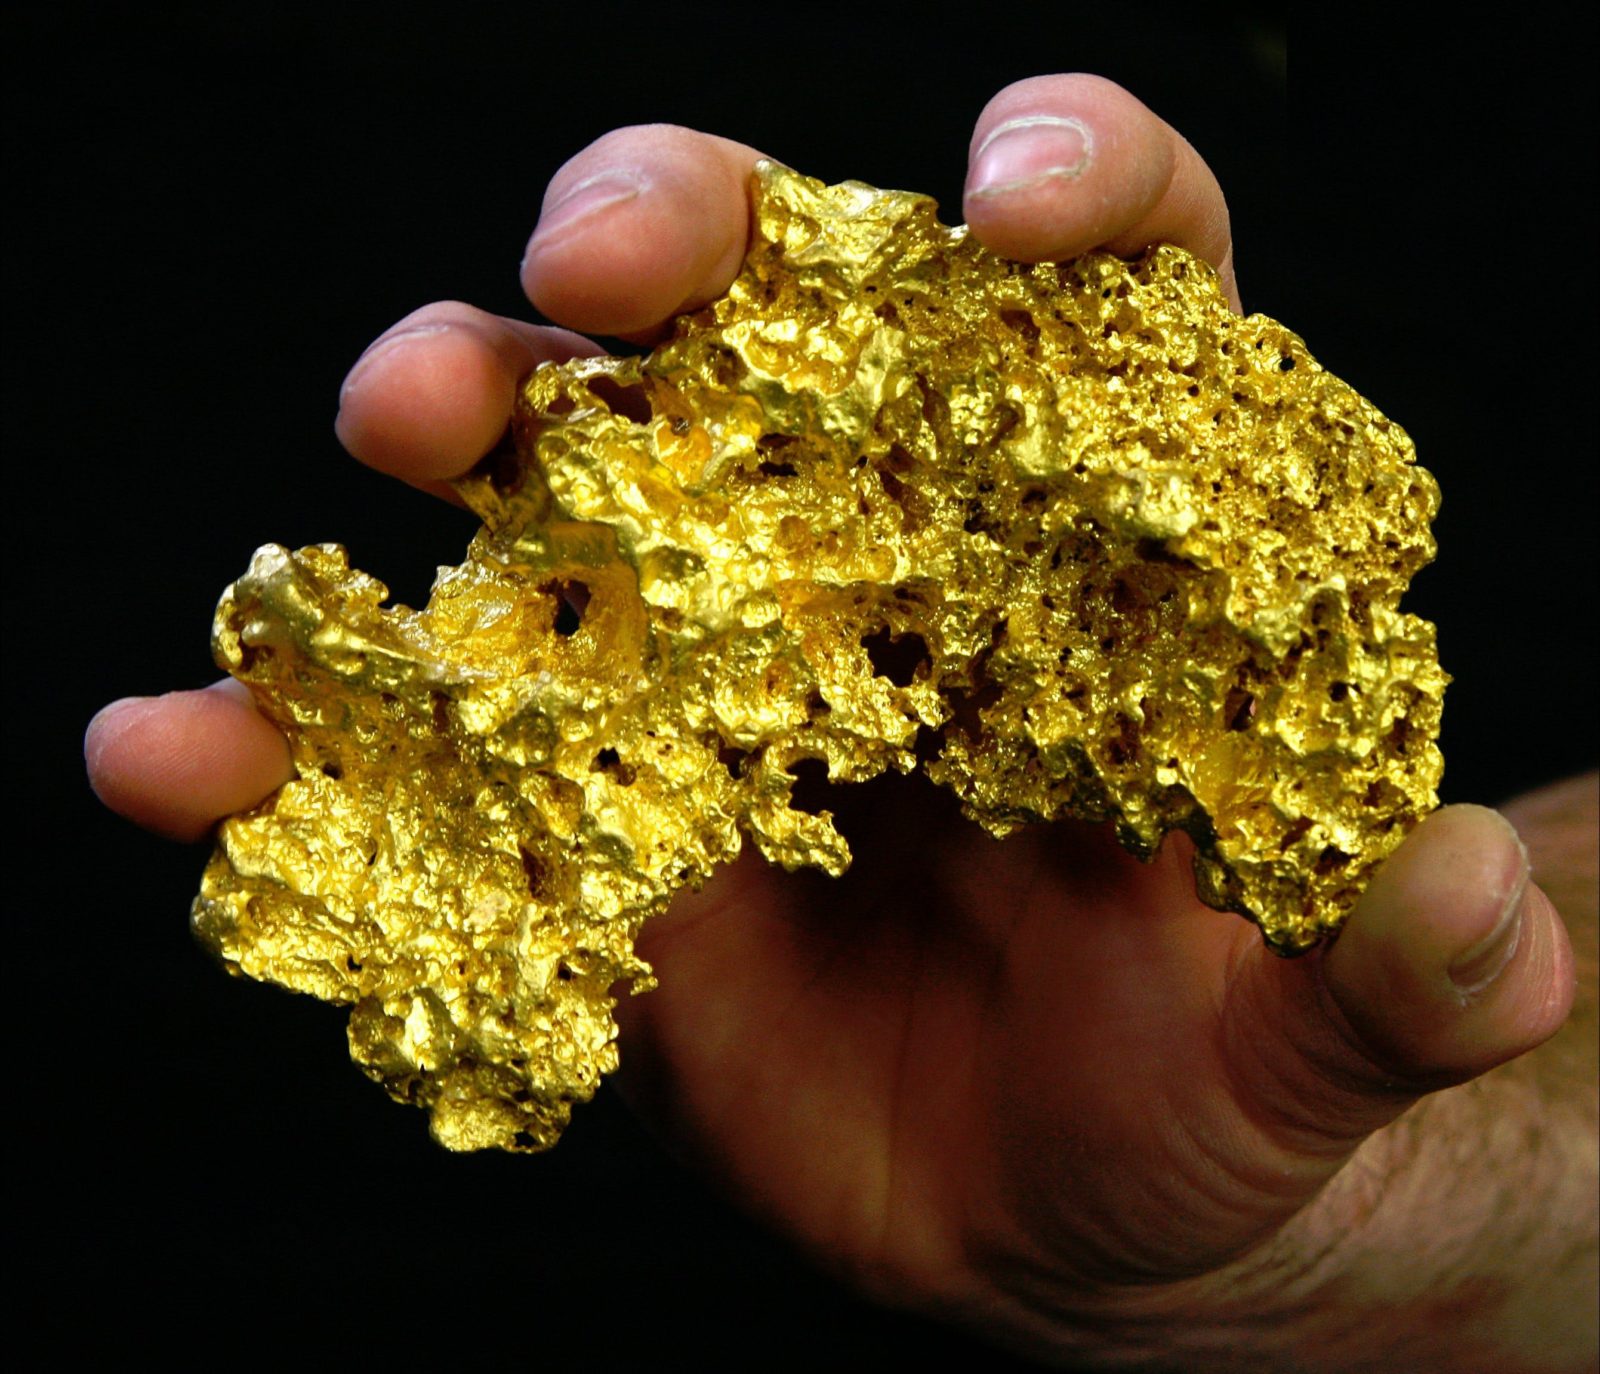 24 oz gold nugget, Gold & Relics gold prospecting adventure tour